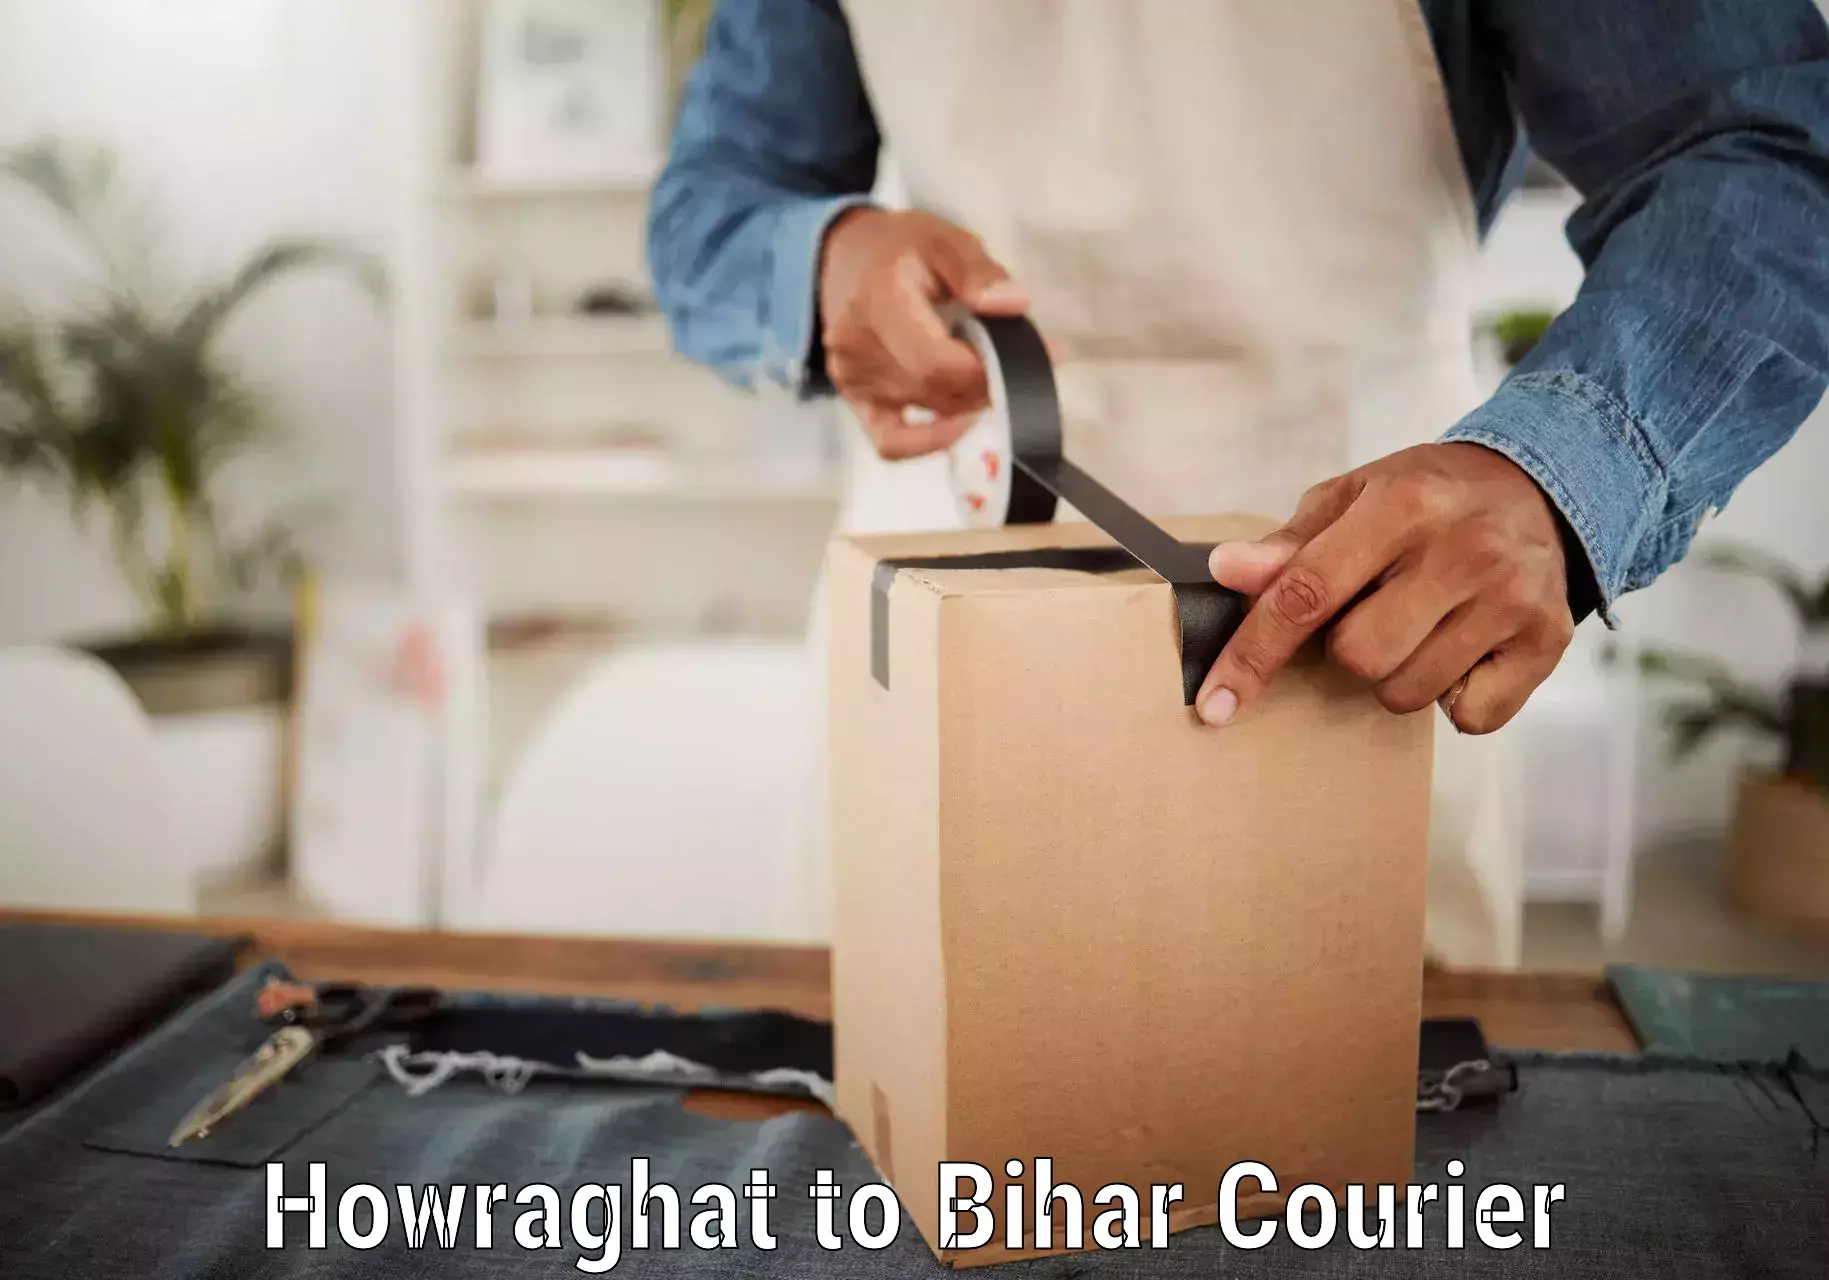 24-hour delivery options Howraghat to Gaya